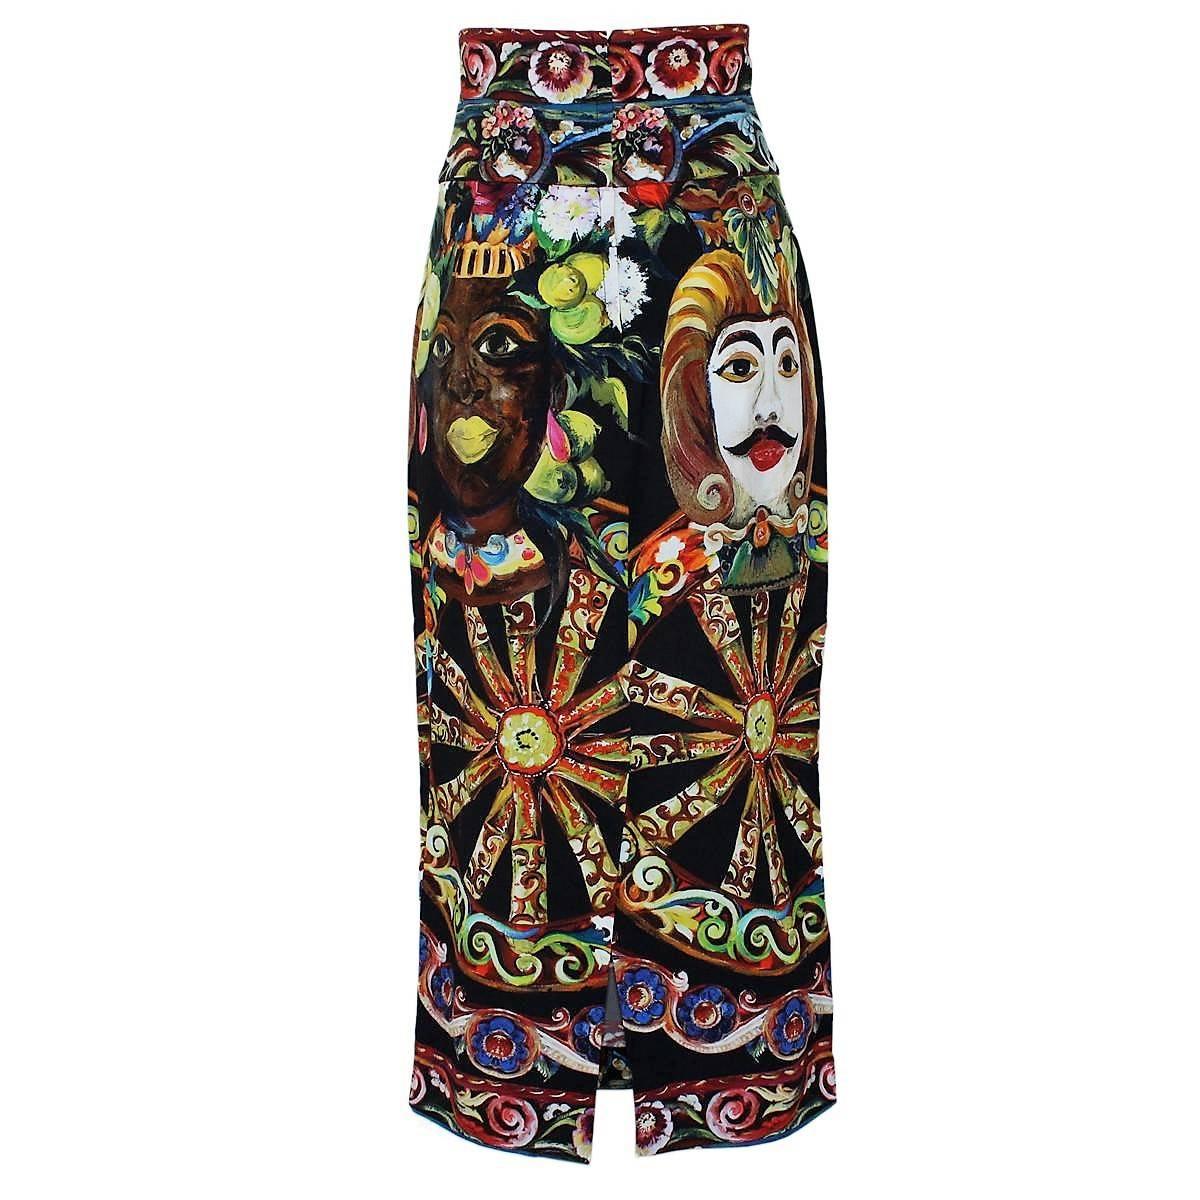 Fantastic skirt by Dolce & Gabana, real masterpiece
